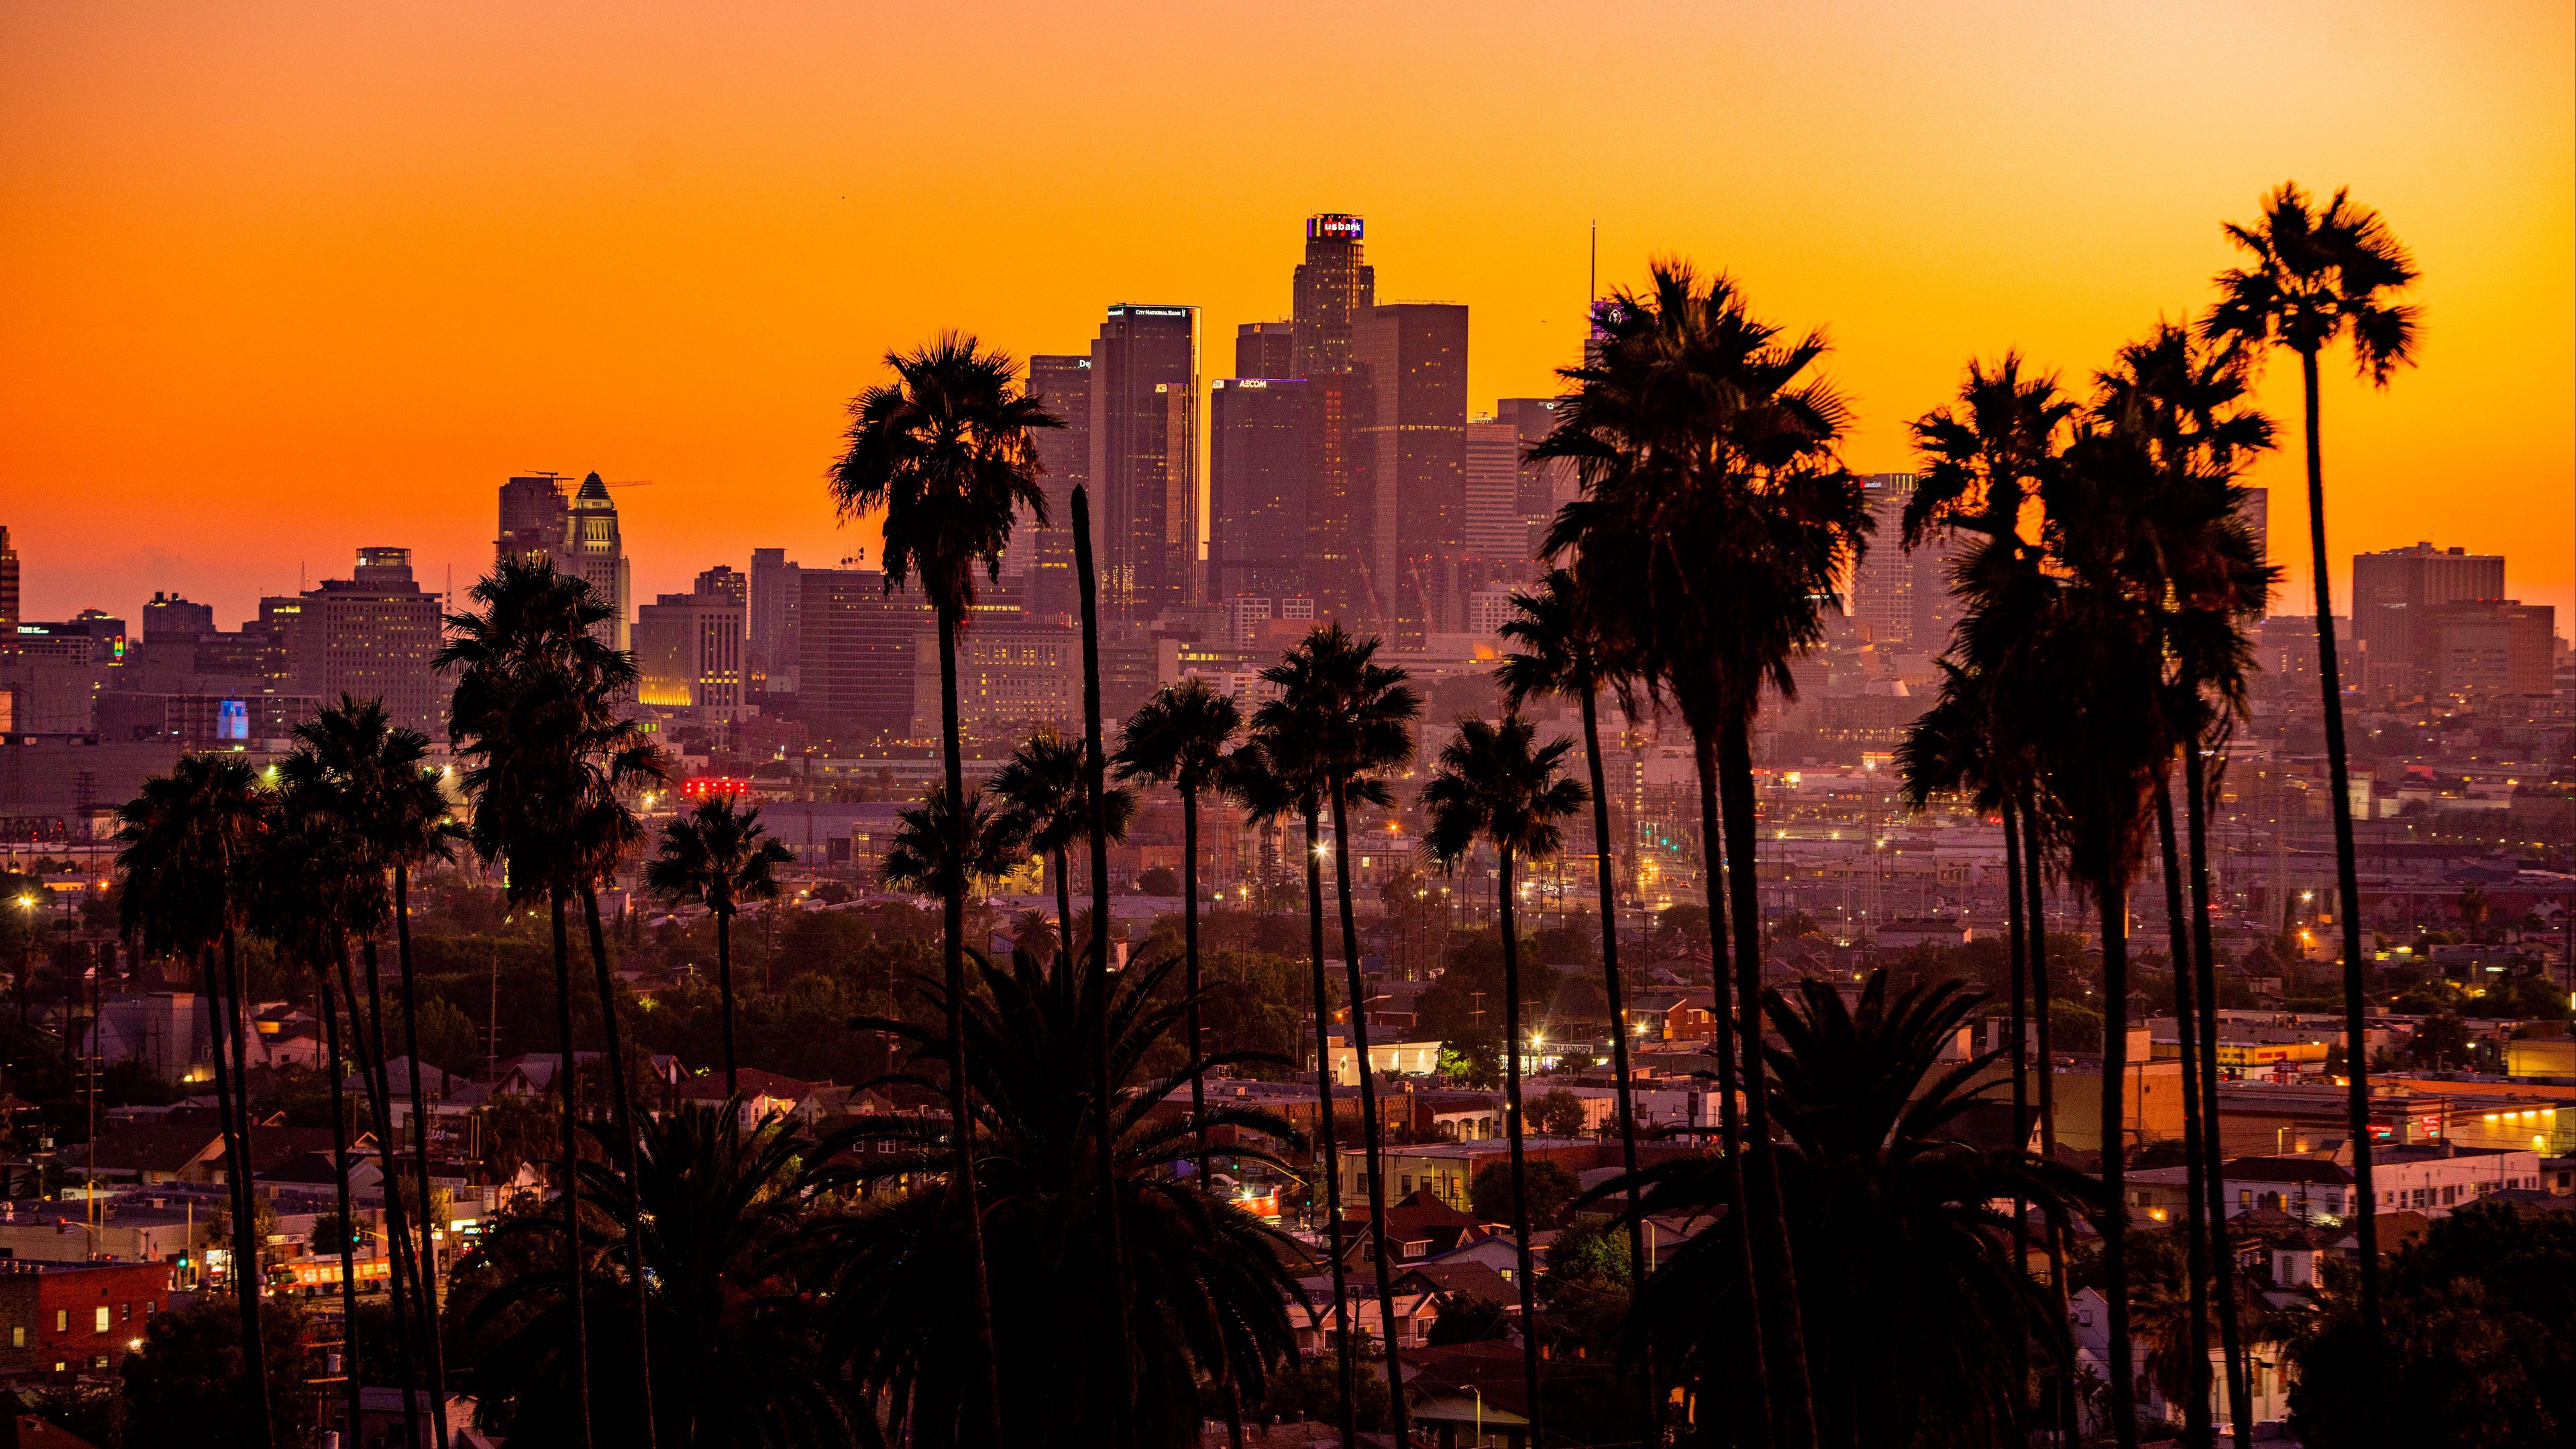 Download wallpapers 3840x2160 city, palm trees, sunset, buildings